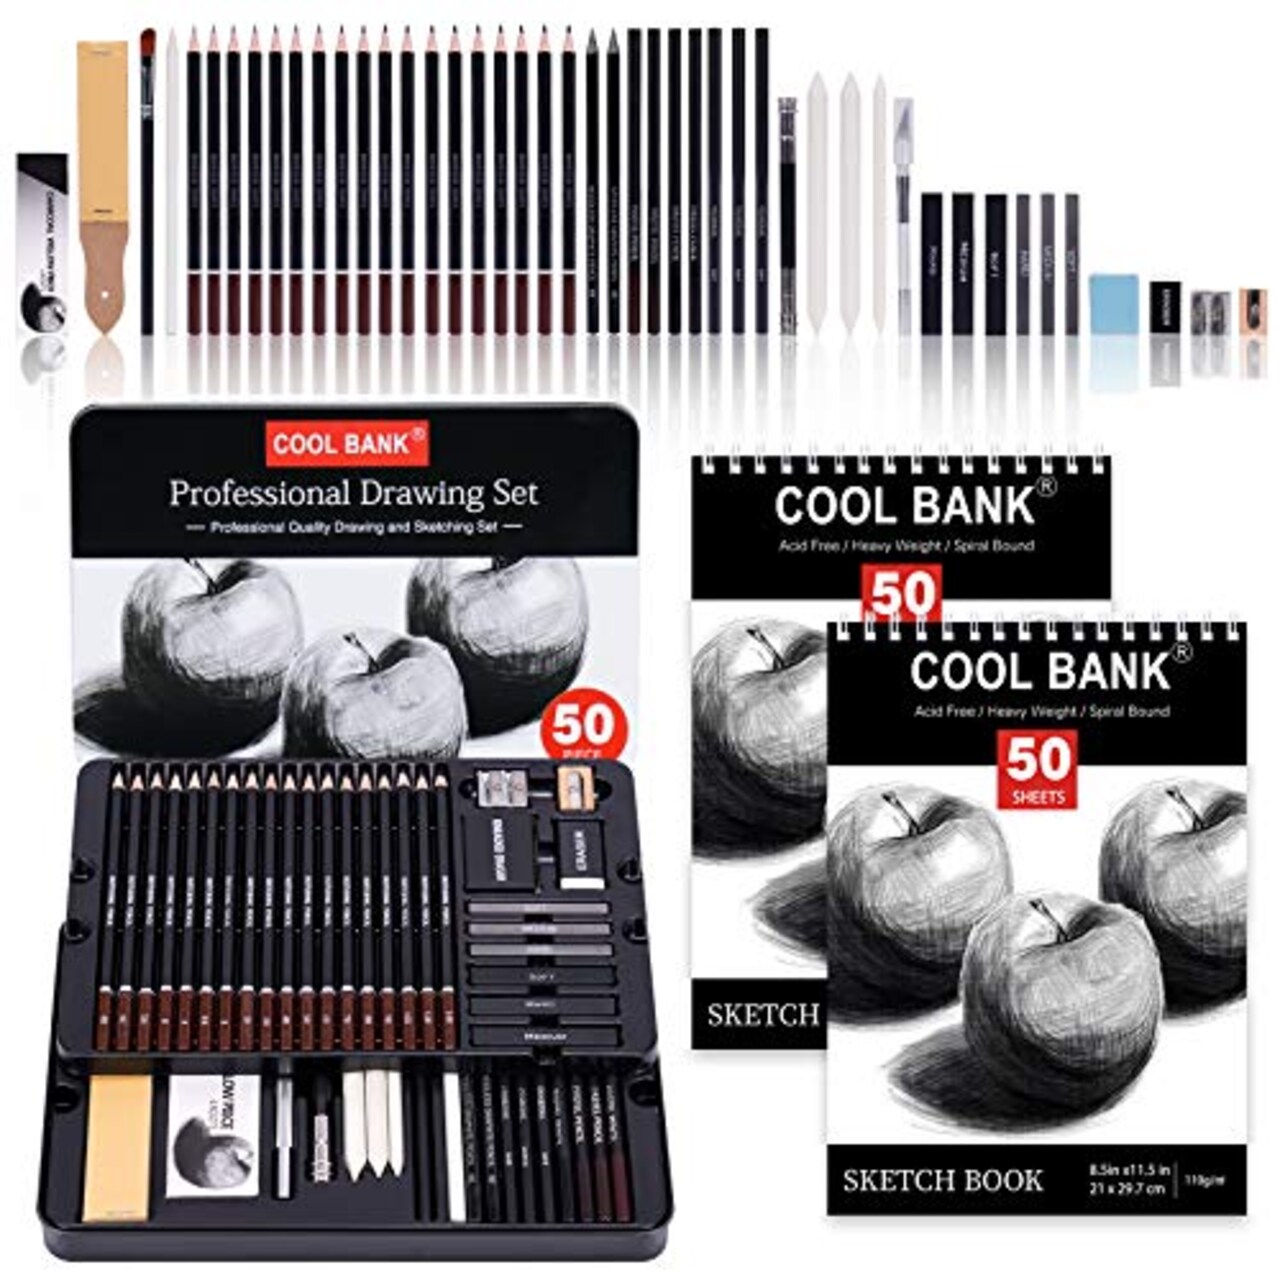 52 Piece Professional Drawing Set with 2 x 50 Page Drawing Pad, Art Supplies,  Graphite Drawing Pencils and Sketch Set, Artist Sketching Tools in Tin Box  Includes Charcoals,Pastels and Sharpener